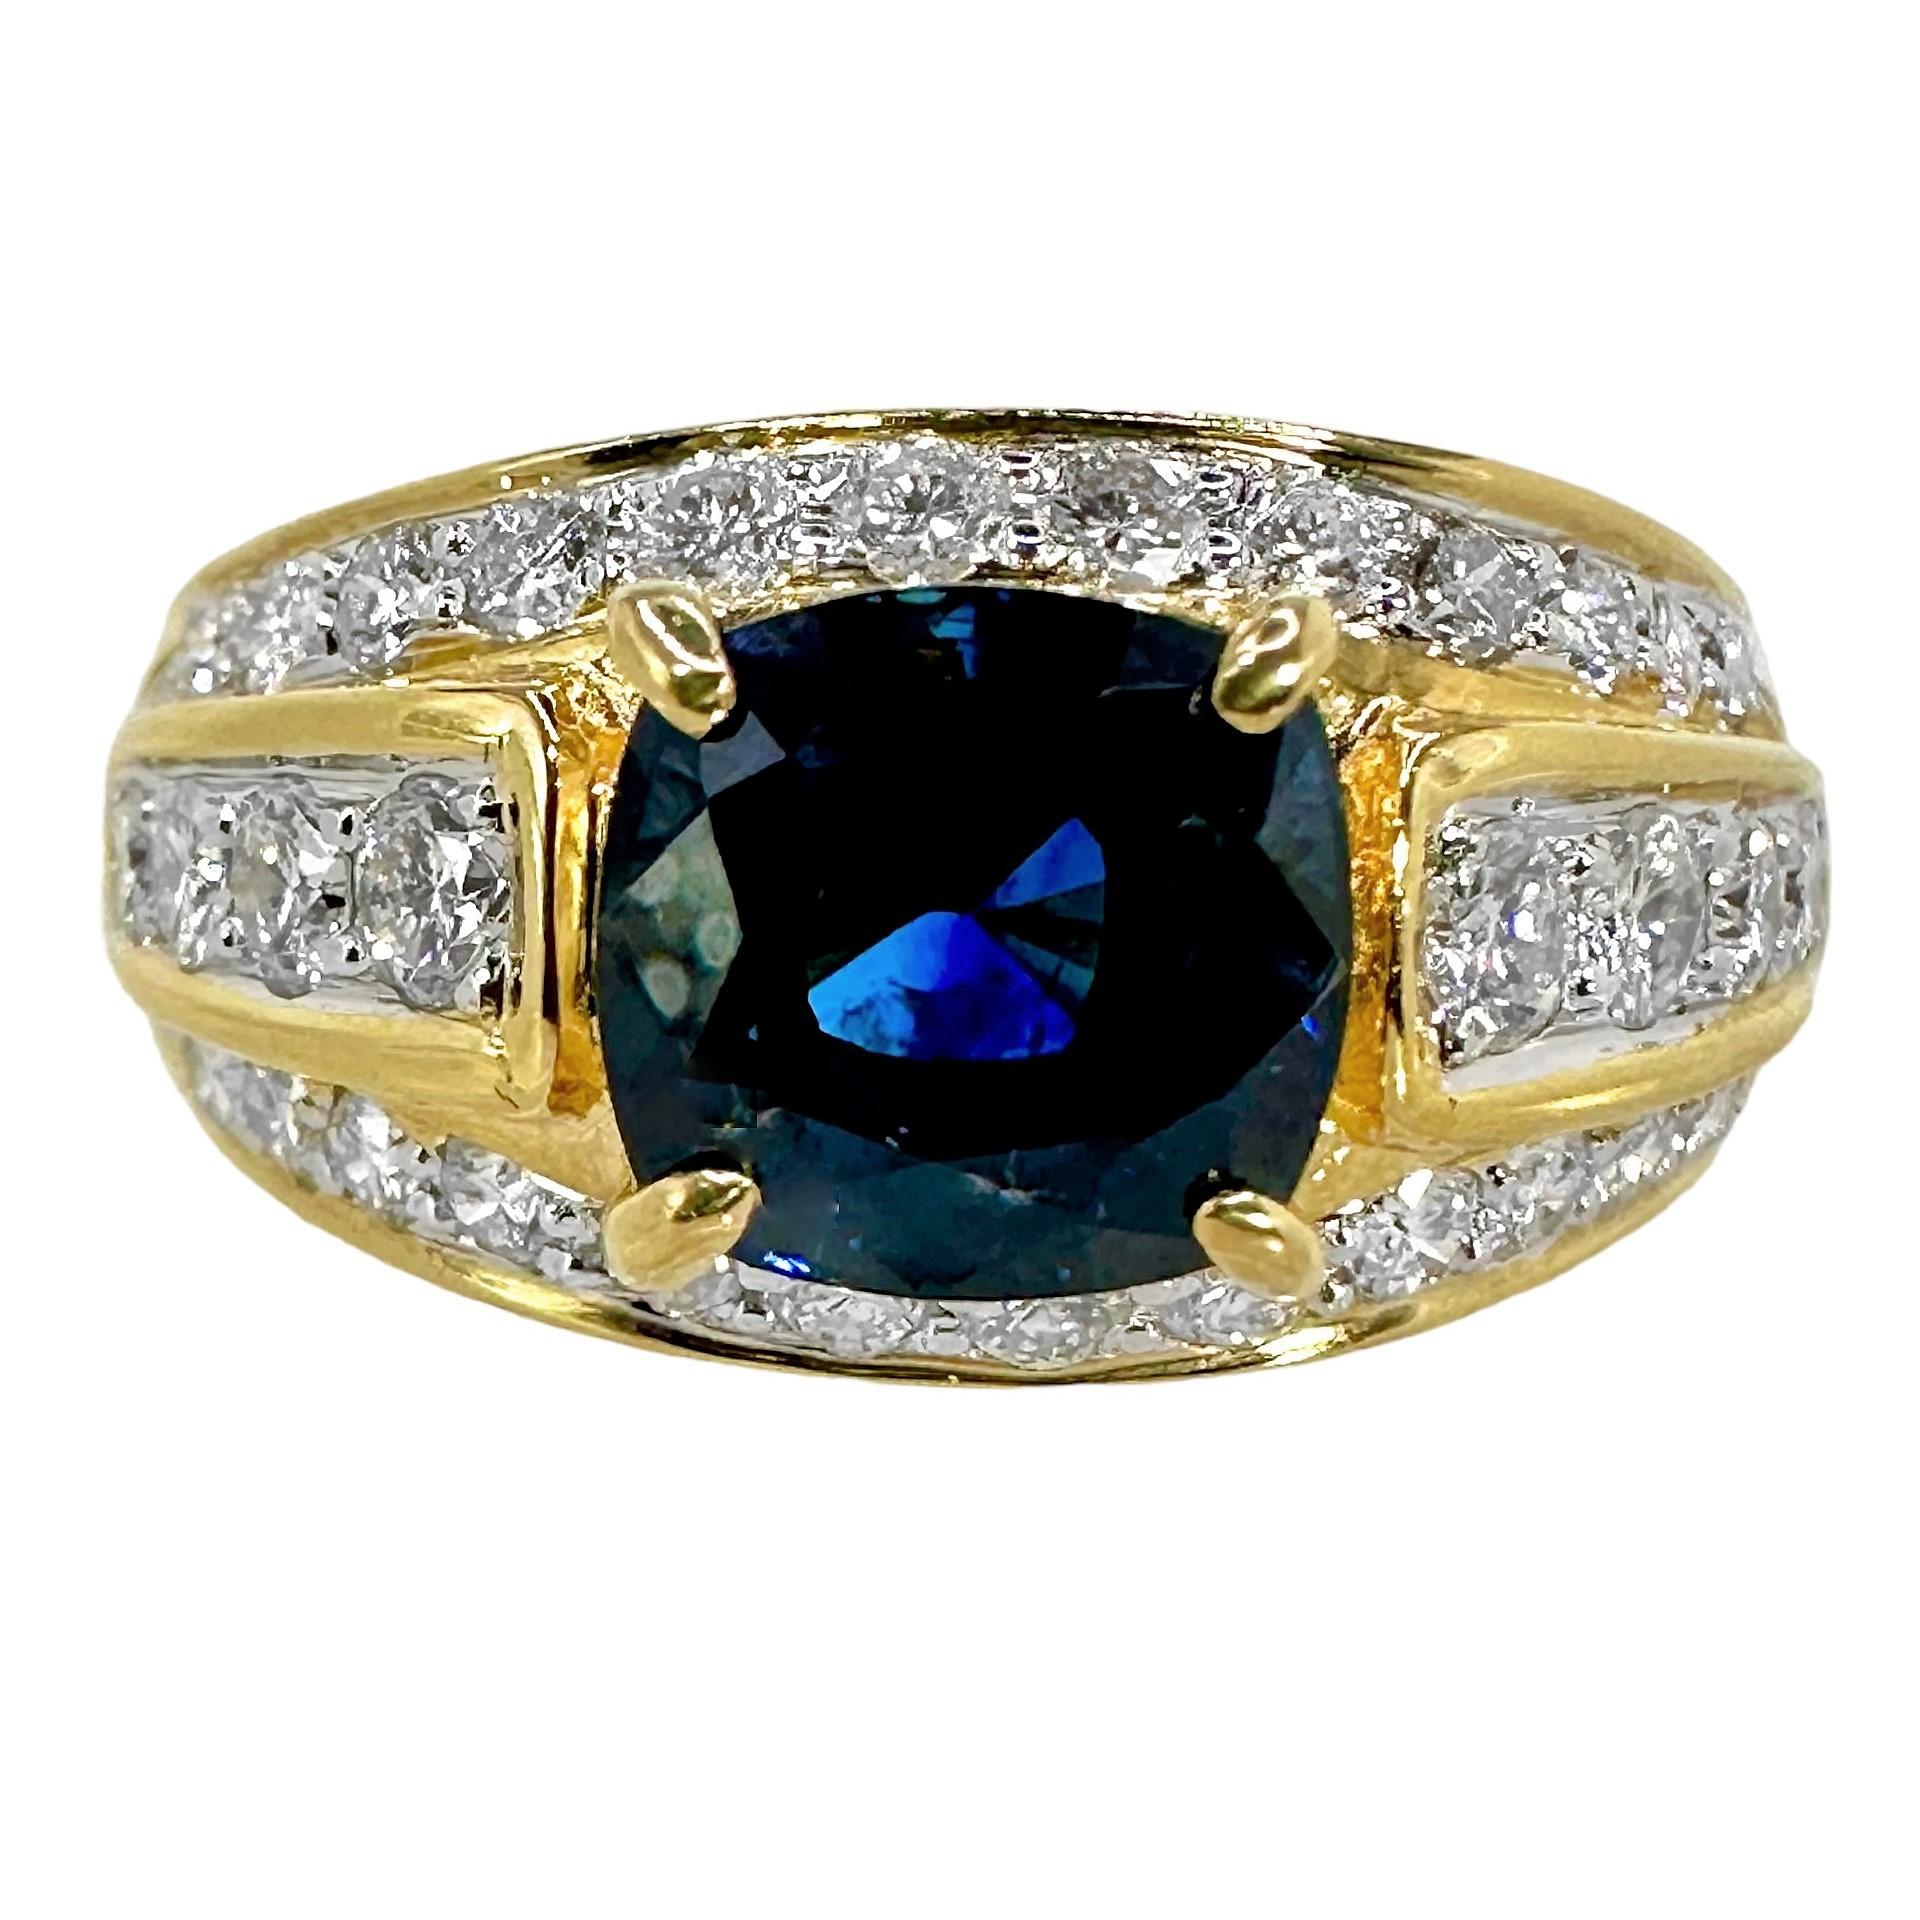 Women's Mid-20th Century 18k Yellow Gold Cocktail Ring with 2.67Ct Sapphire & Diamonds For Sale